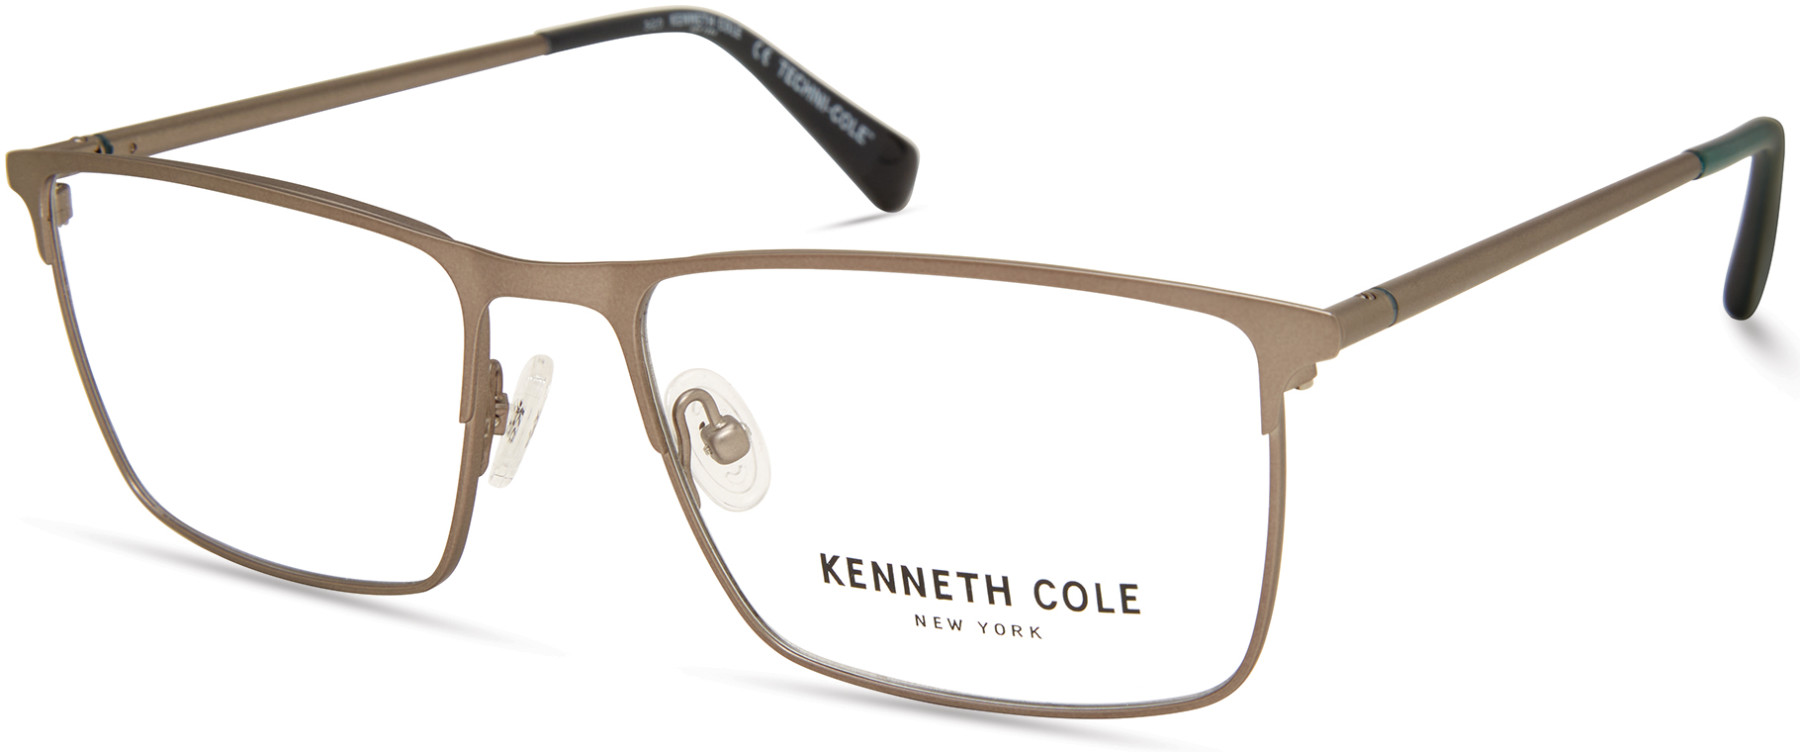 KENNETH COLE NY 0323 009